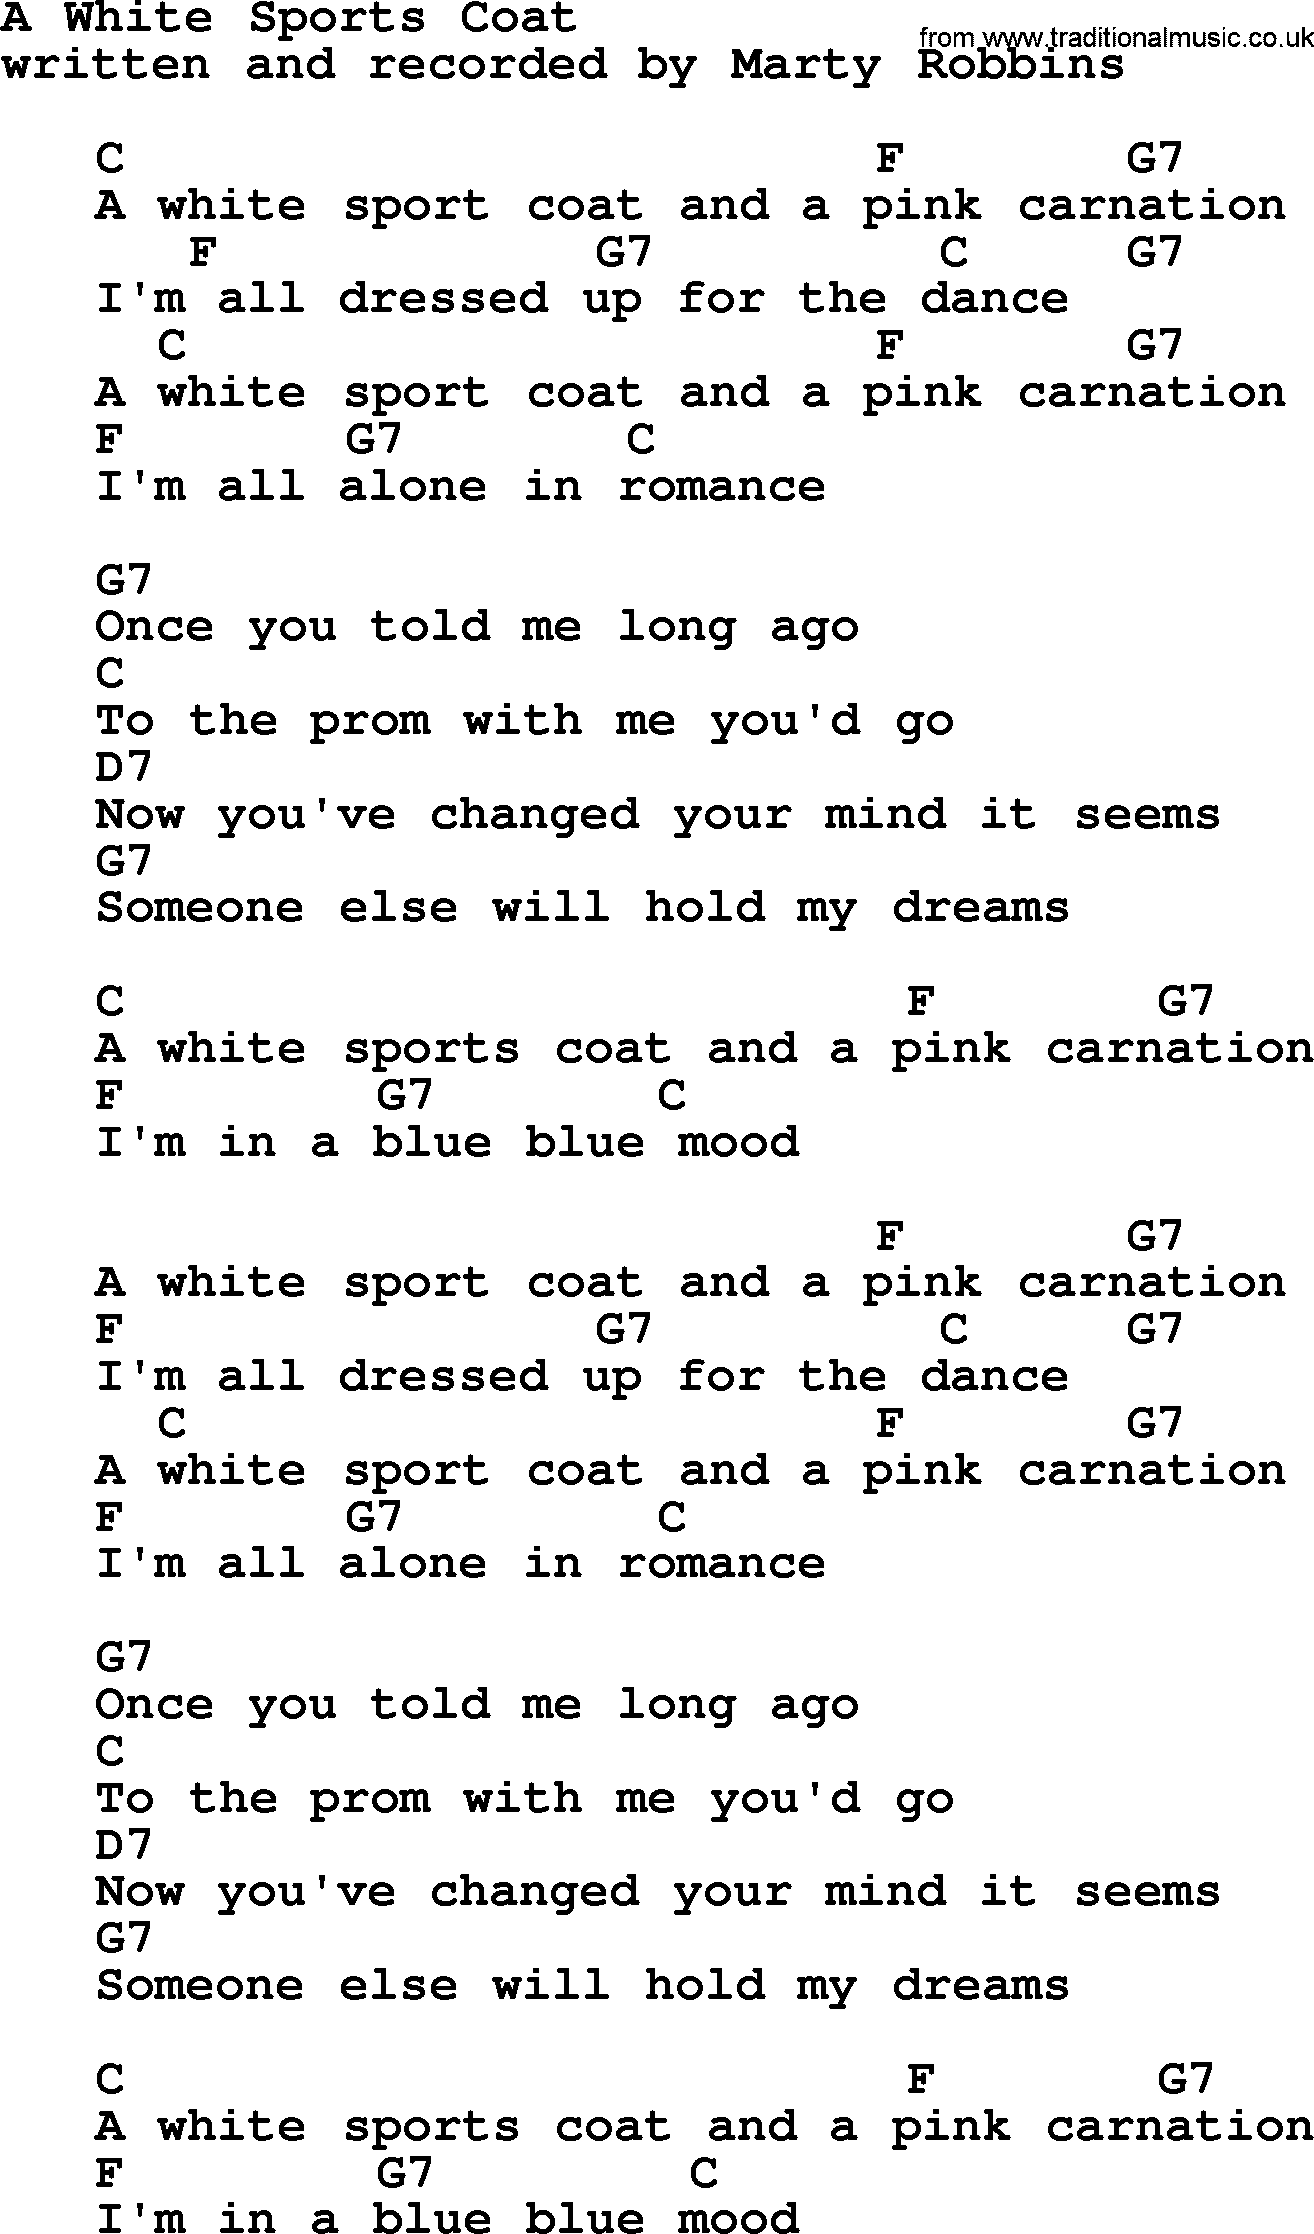 Marty Robbins song: A White Sports Coat, lyrics and chords